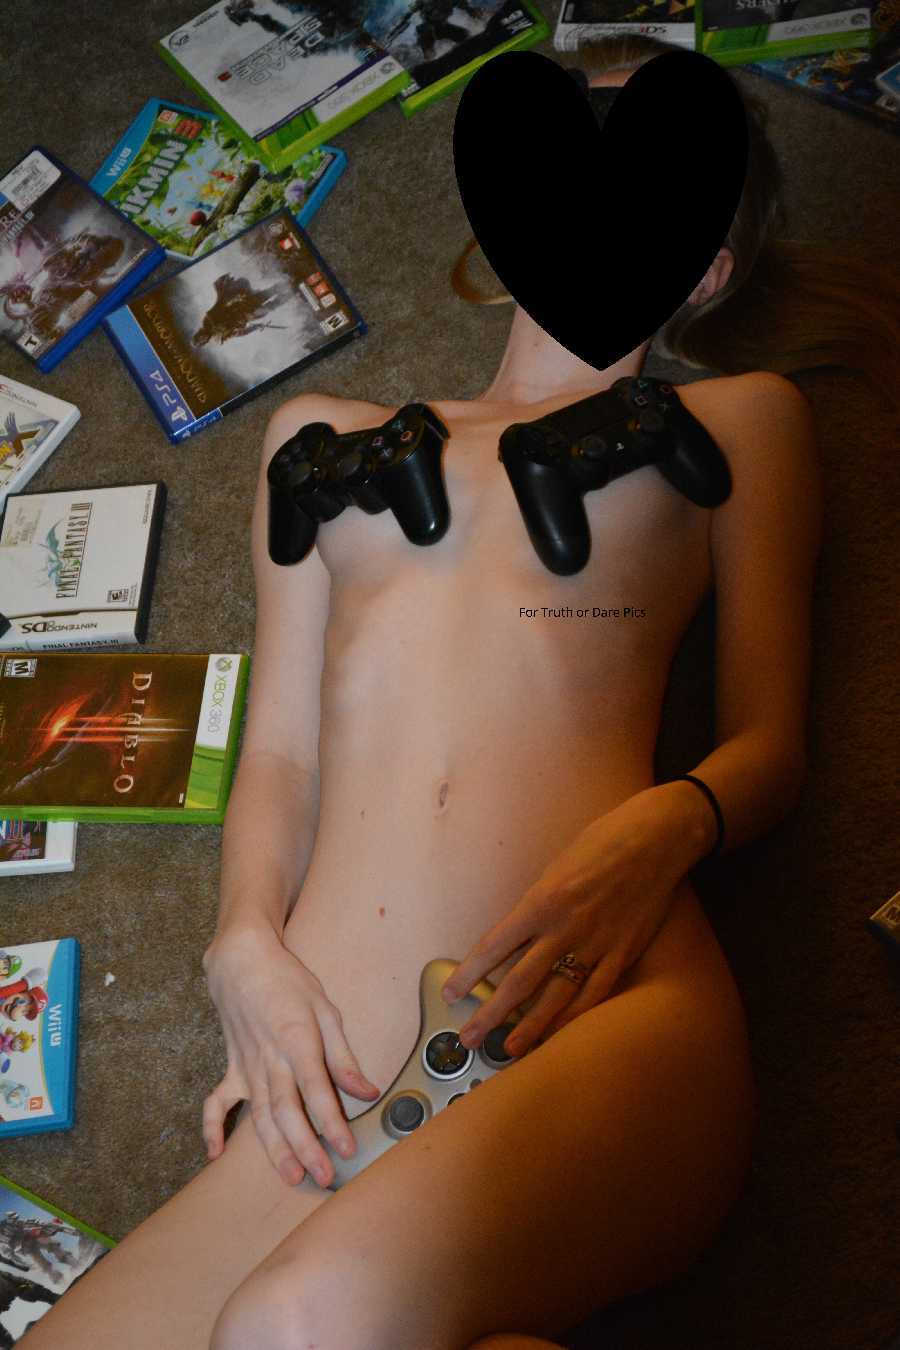 Video game nude